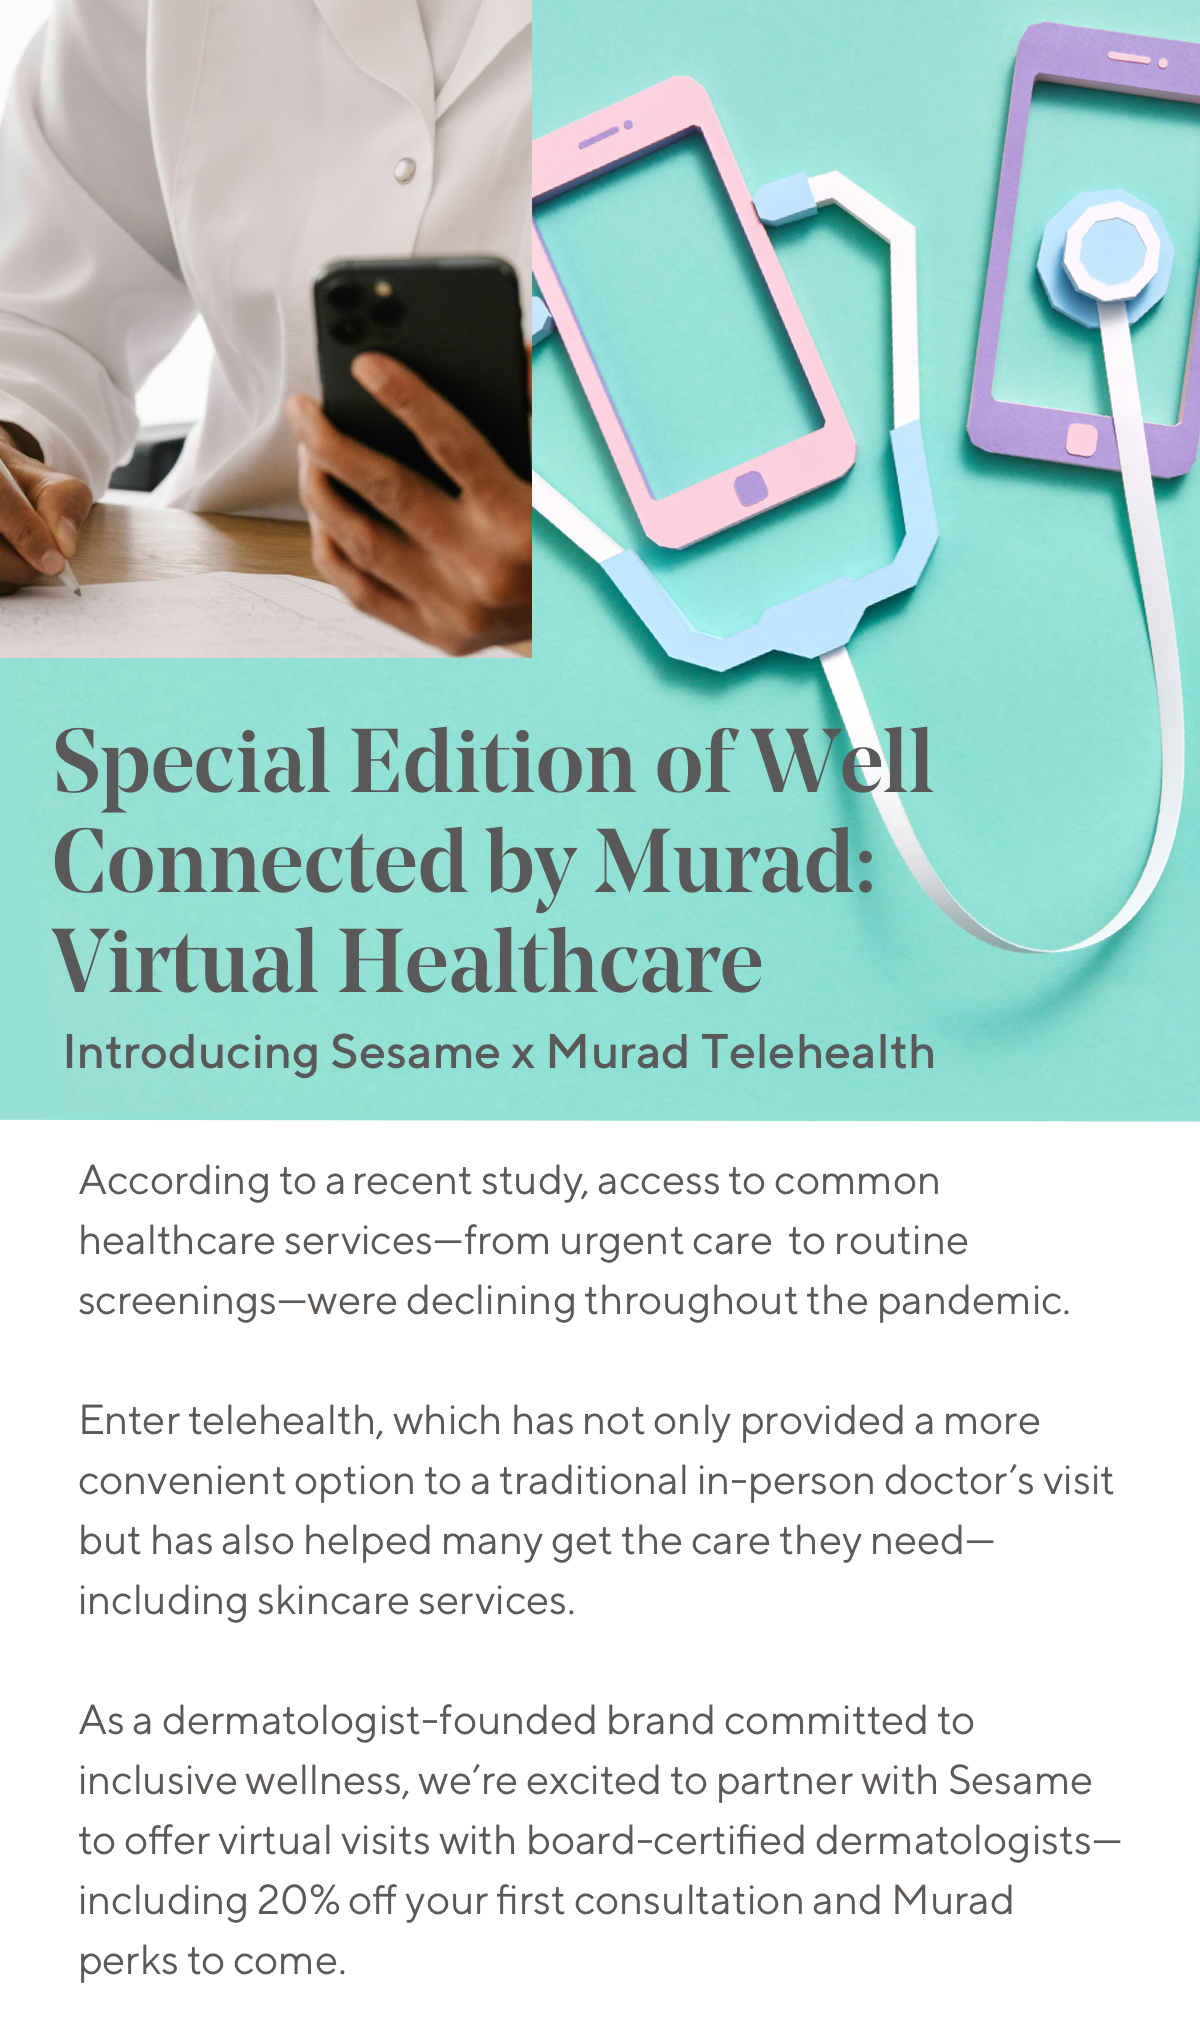 Special Edition of Well Connected by Murad: Virtual Healthcare